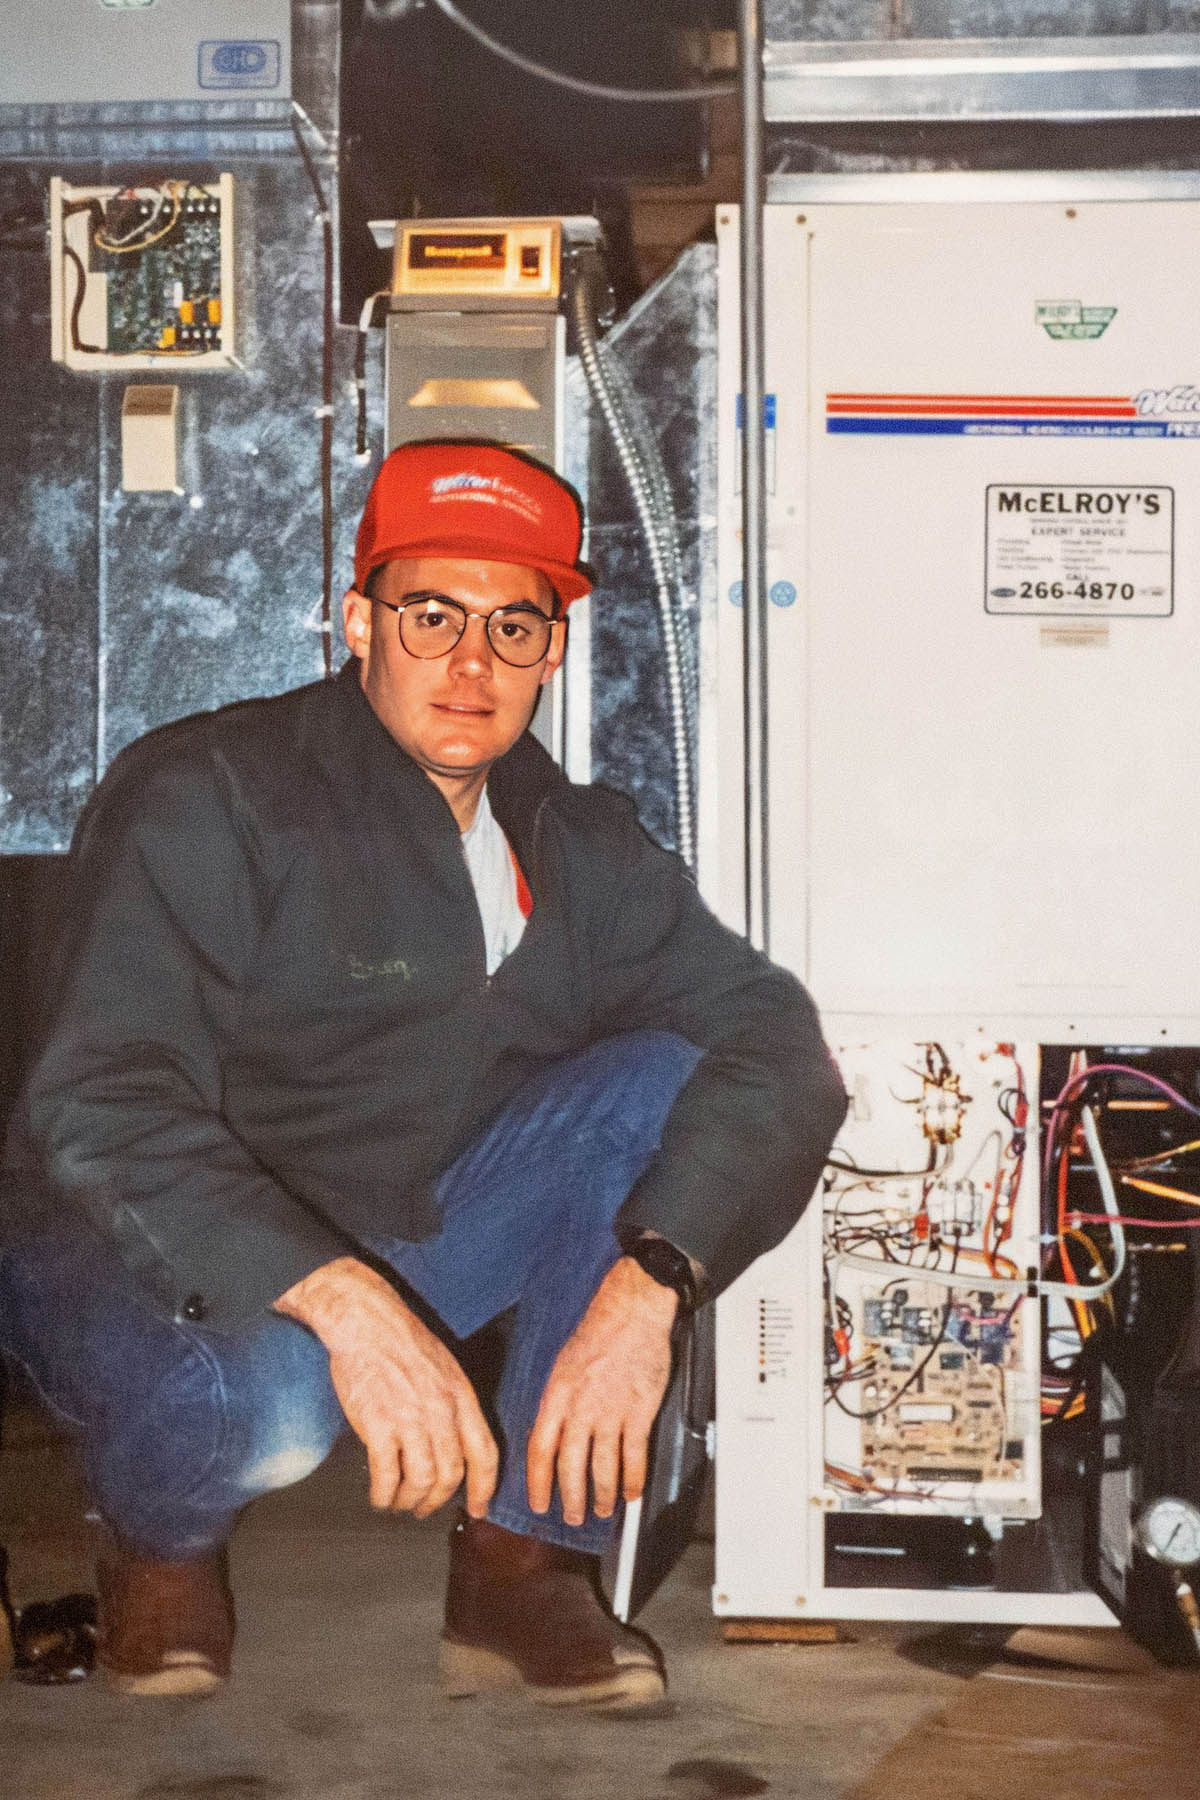 Greg Hunsicker, McElroy’s leader of residential HVAC, with a geothermal furnace installed by McElroy’s in 1990.